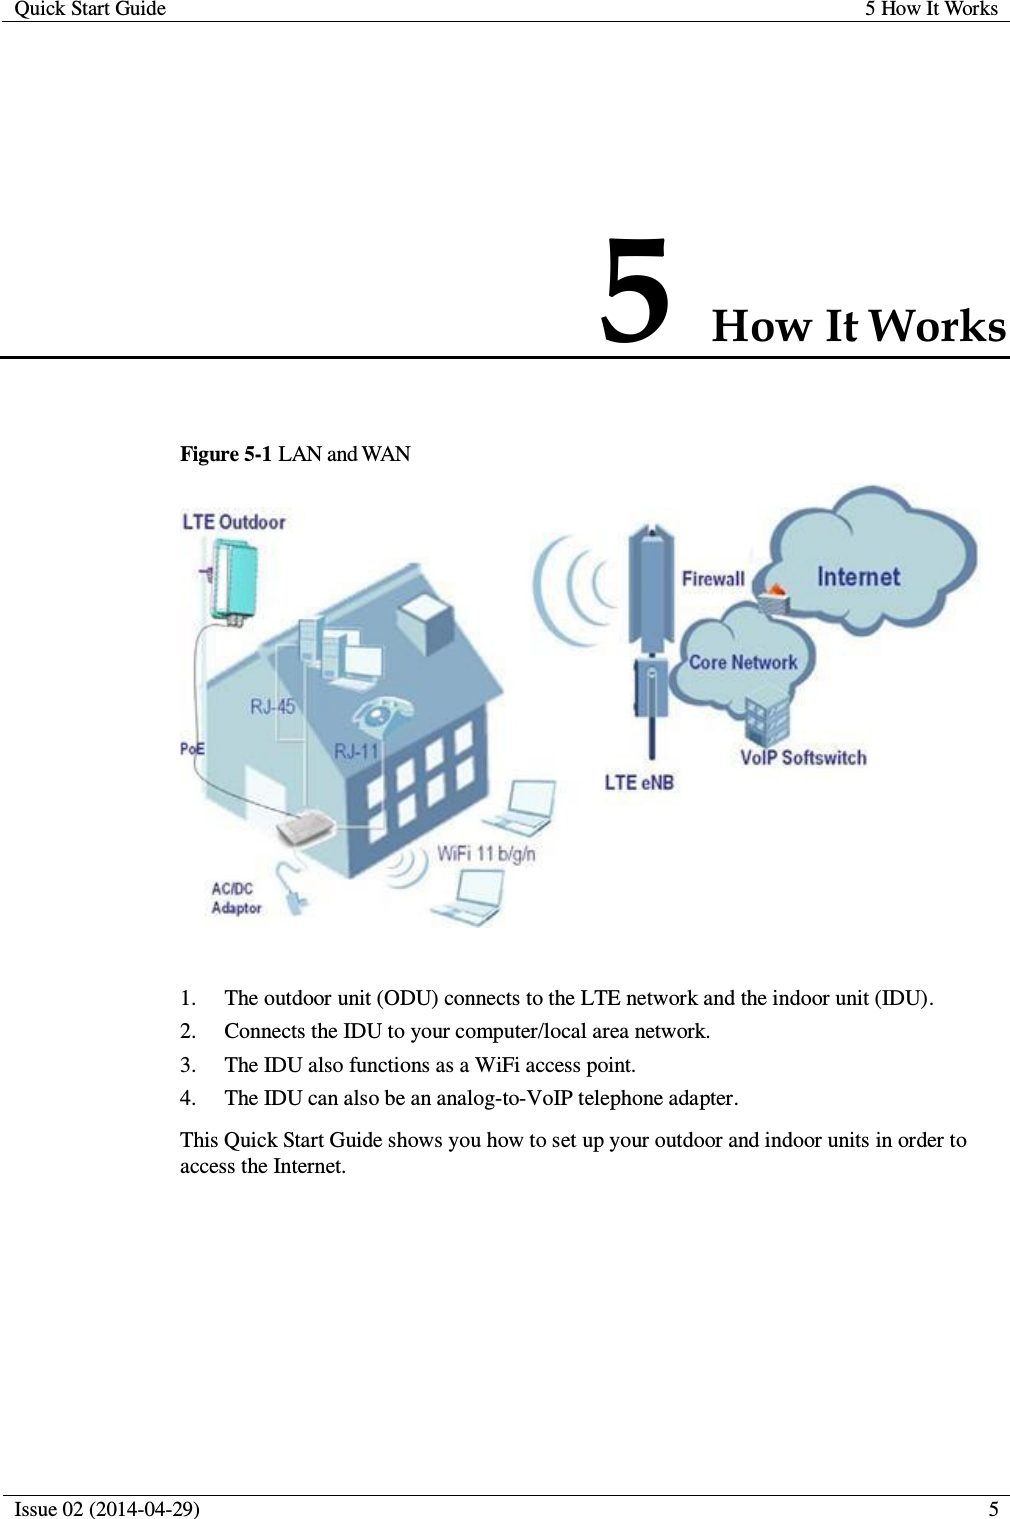 Quick Start Guide 5 How It Works  Issue 02 (2014-04-29)  5  5 How It Works Figure 5-1 LAN and WAN   1. The outdoor unit (ODU) connects to the LTE network and the indoor unit (IDU). 2. Connects the IDU to your computer/local area network. 3. The IDU also functions as a WiFi access point. 4. The IDU can also be an analog-to-VoIP telephone adapter. This Quick Start Guide shows you how to set up your outdoor and indoor units in order to access the Internet. 